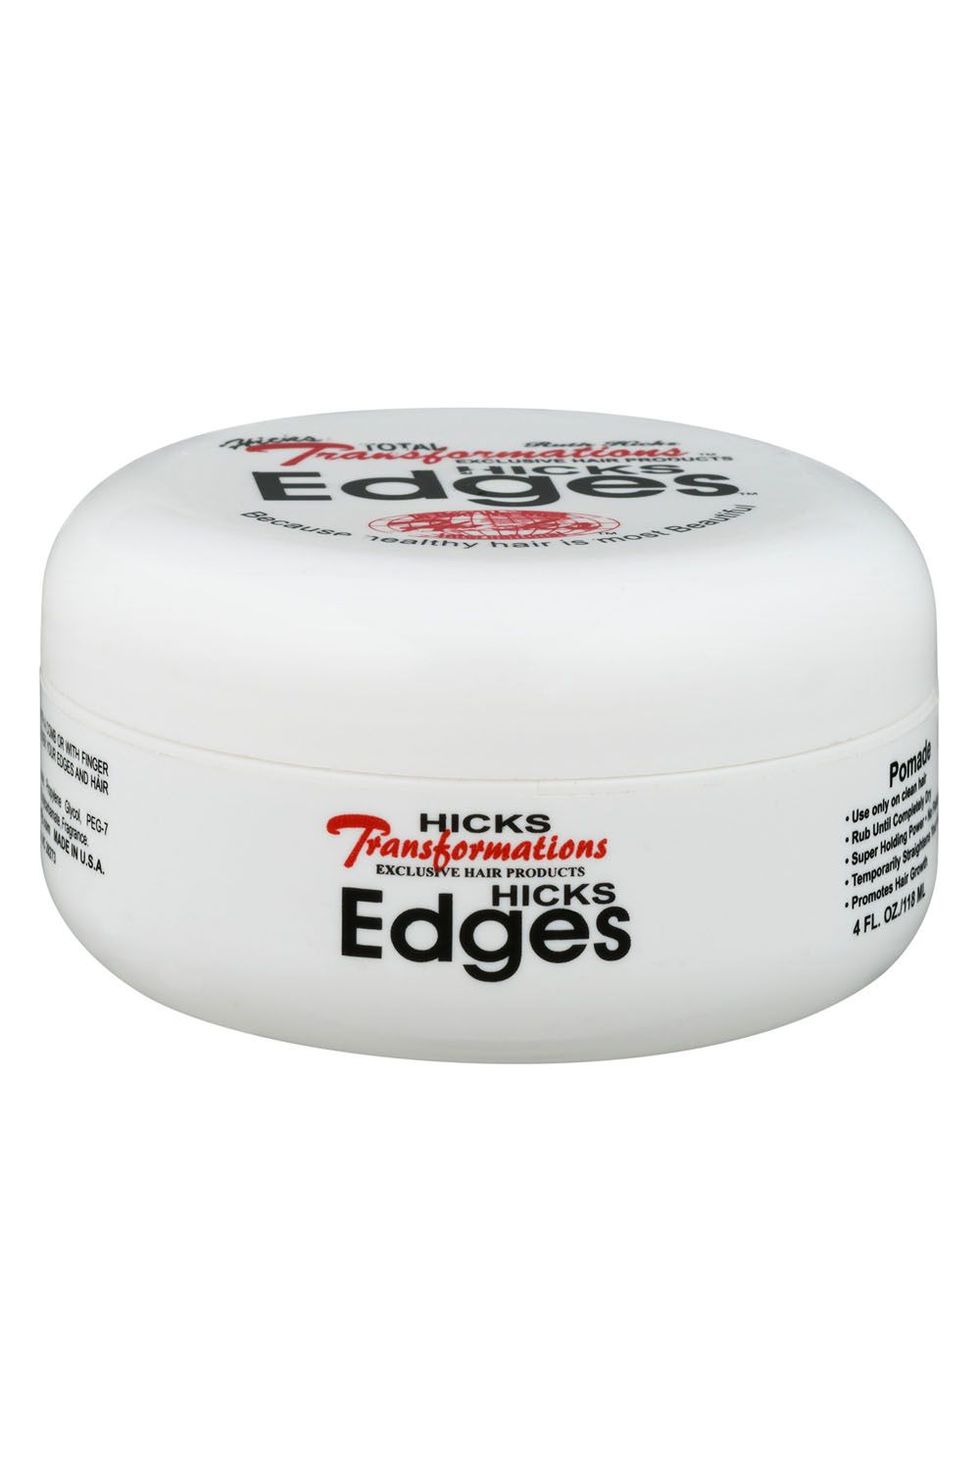 Total Transformations Edges Styling Gel